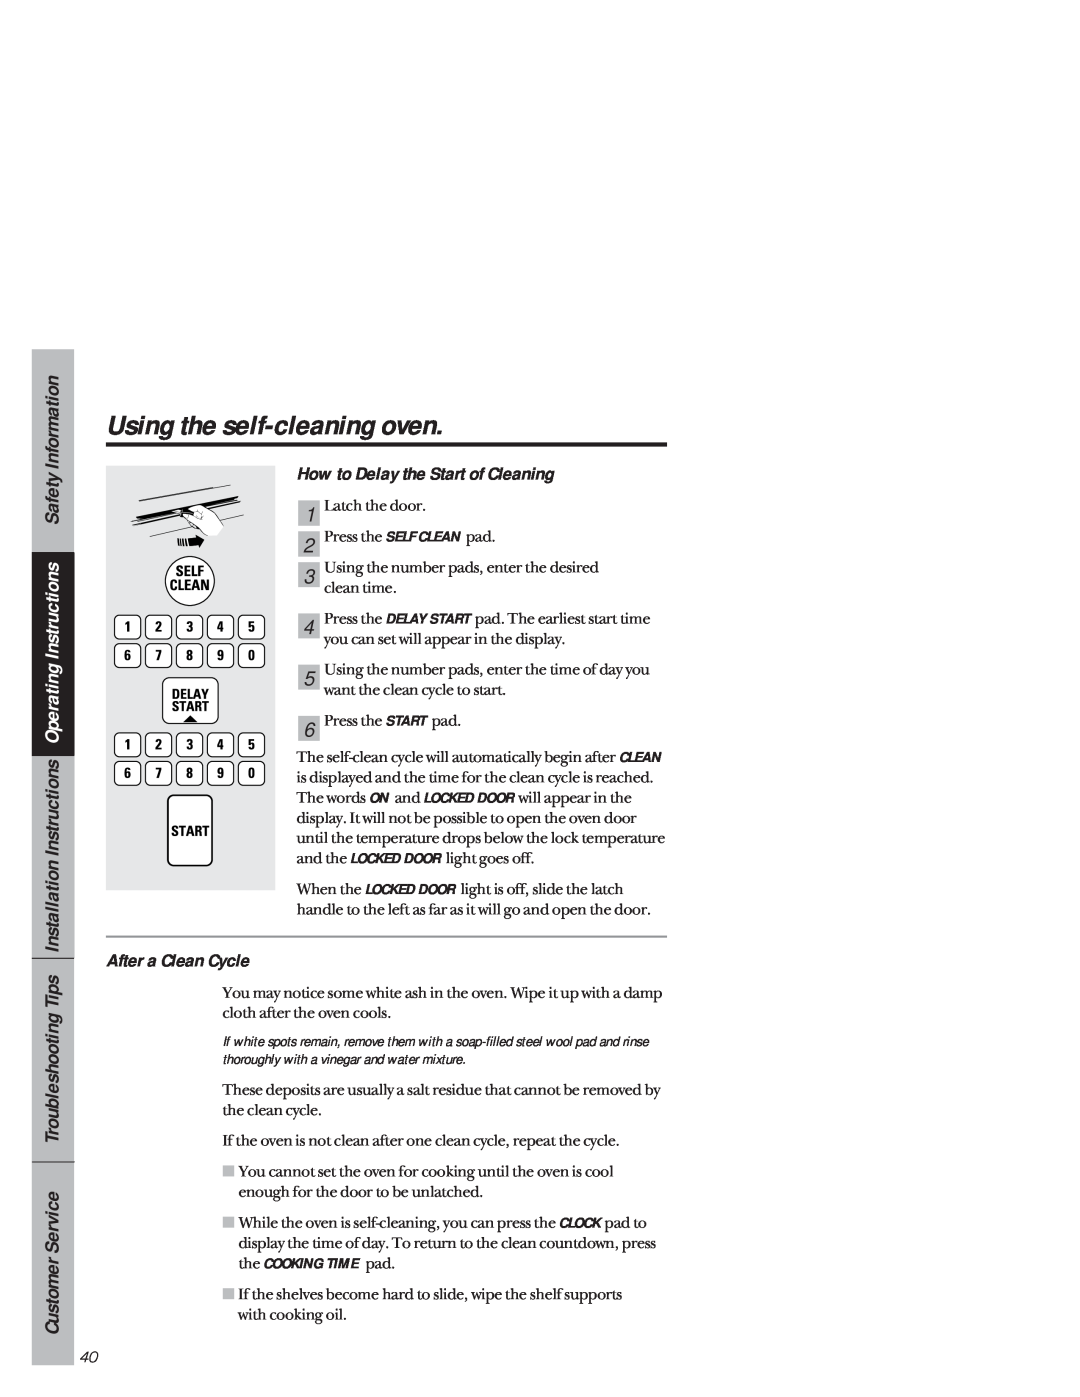 GE JB940 owner manual How to Delay the Start of Cleaning, After a Clean Cycle, Using the self-cleaning oven 